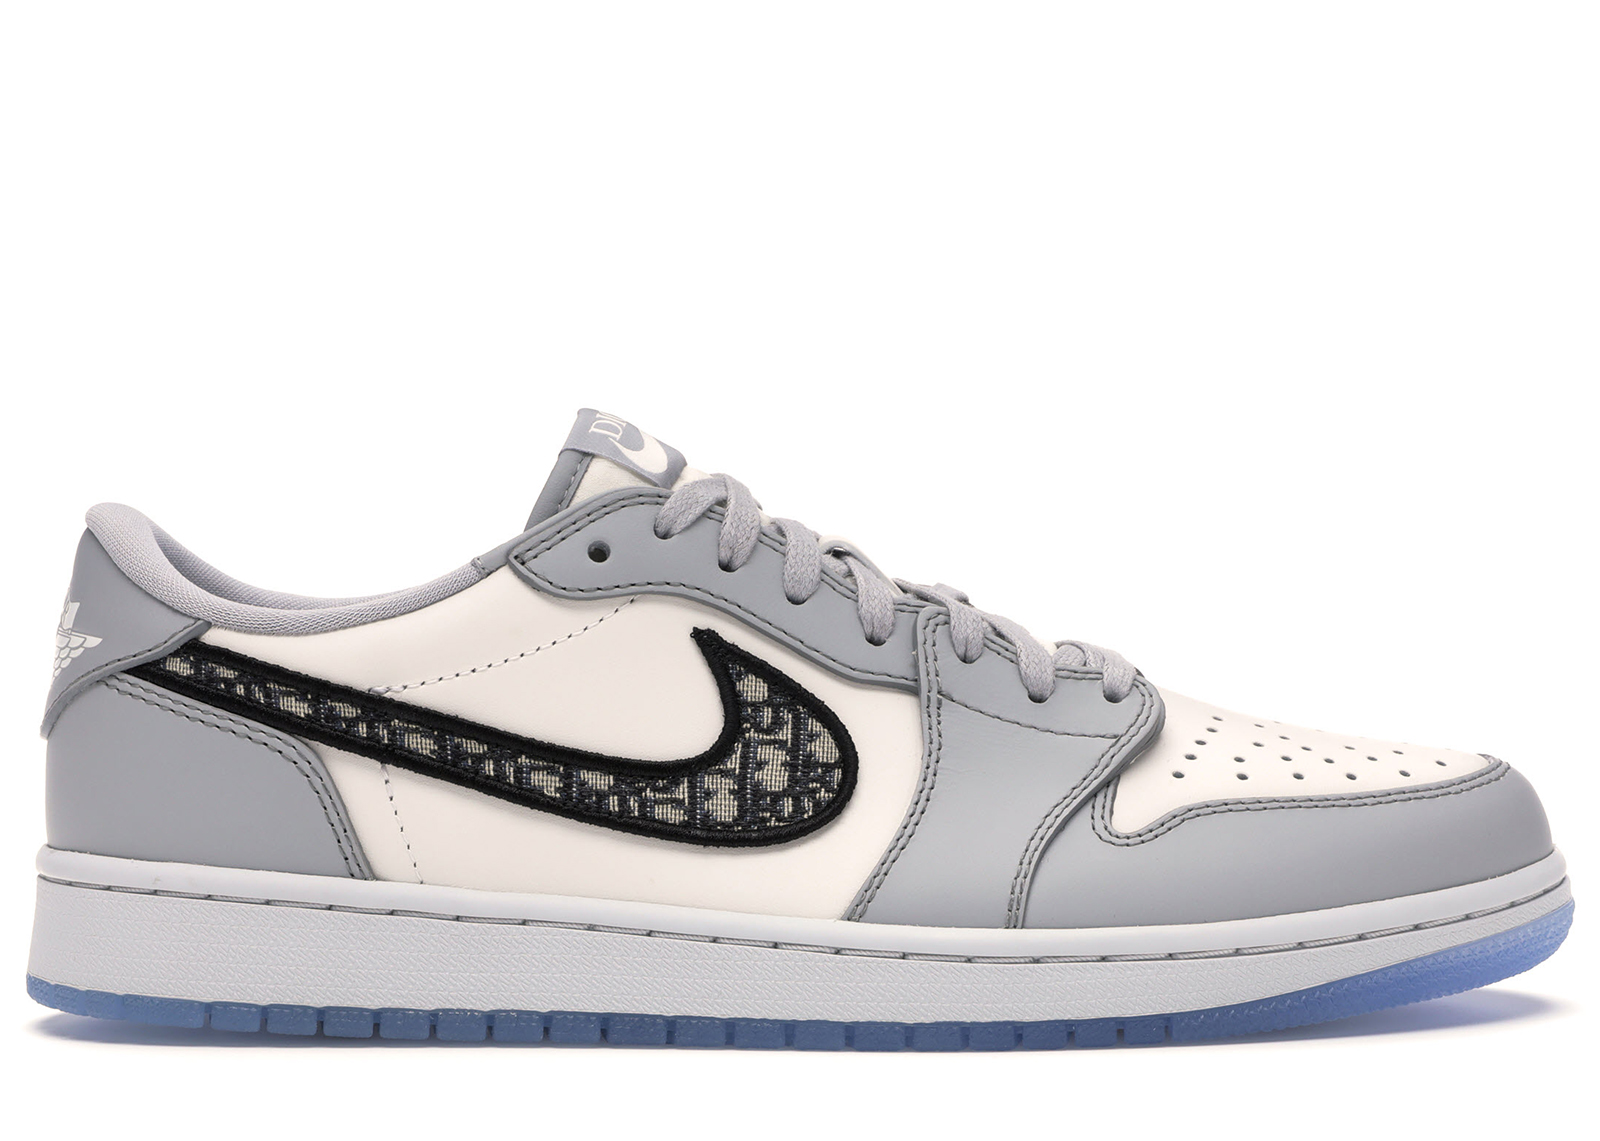 Nike Nike Air Jordan 1 Low Dior  Size 75 Available For Immediate Sale At  Sothebys